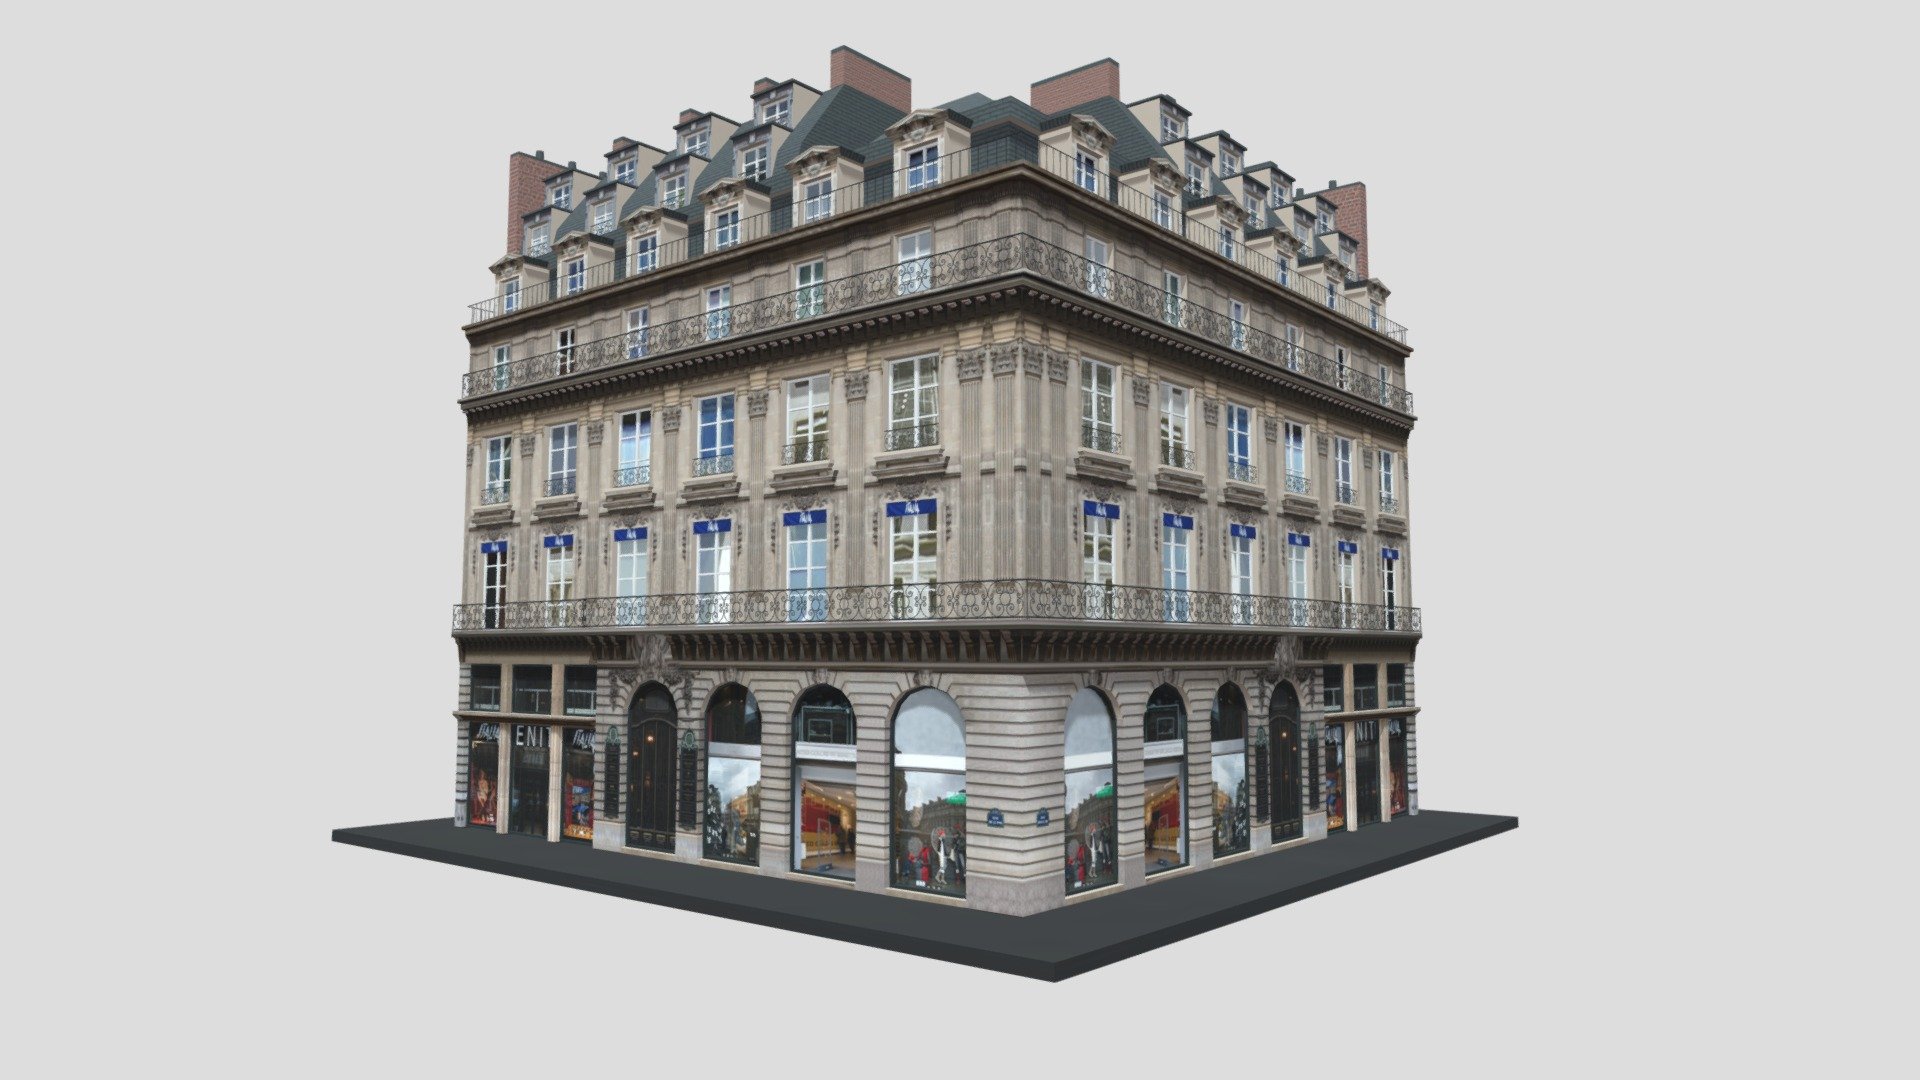 Typical Parisian Apartment Building 32
Originally created with 3ds Max 2015 and rendered in V-Ray 3.0. 

Total Poly Counts:
Poly Count = 193611
Vertex Count = 194625

Please Visit: 
https://nuralam3d.blogspot.com/2021/09/typical-parisian-apartment-building-32.html - Typical Parisian Apartment Building 32 - 3D model by nuralam018 3d model